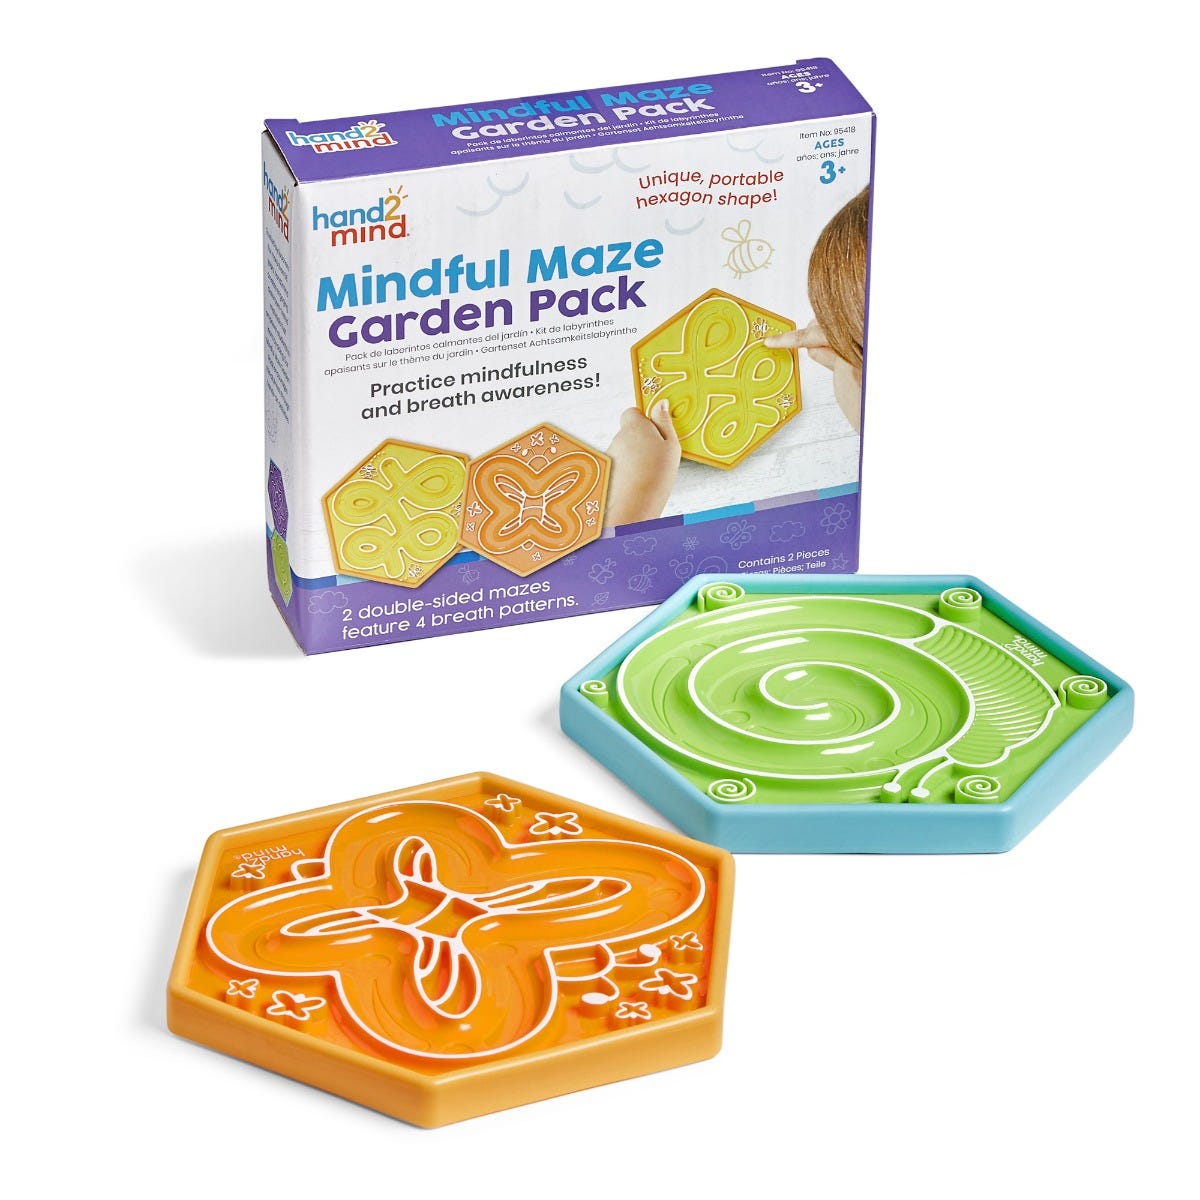 Mindful Maze Garden Pack, Practise breathing and awareness with this Mindful Maze Garden Pack tactile set for children. The Mindful Maze Garden Pack is an ideal resource to help children focus on their breathing at home or in the classroom through guided prompts and activities inspired by nature. To use, children trace their fingers along a design on these double-sided boards, using the winding Lazy River, curved Butterfly, Snail spiral, or blooming Flower breath patterns to calm and focus their attention. 